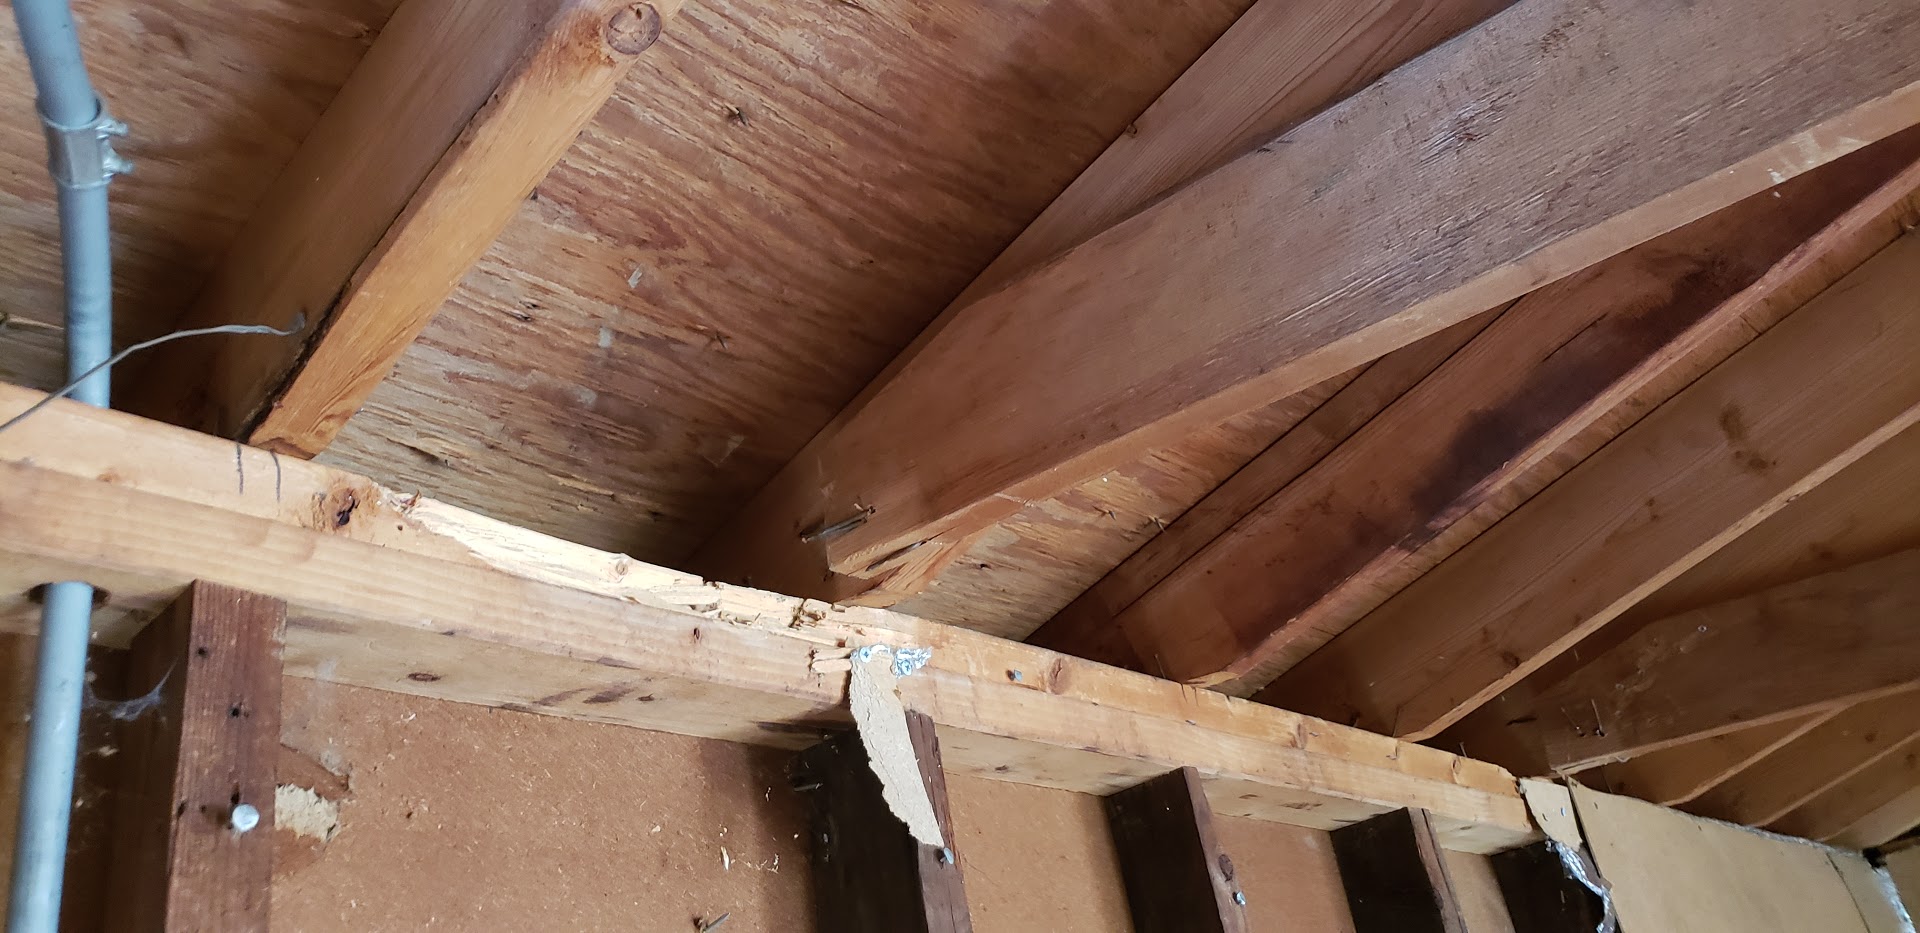 Wall plate cracked, rafter tie was previously down